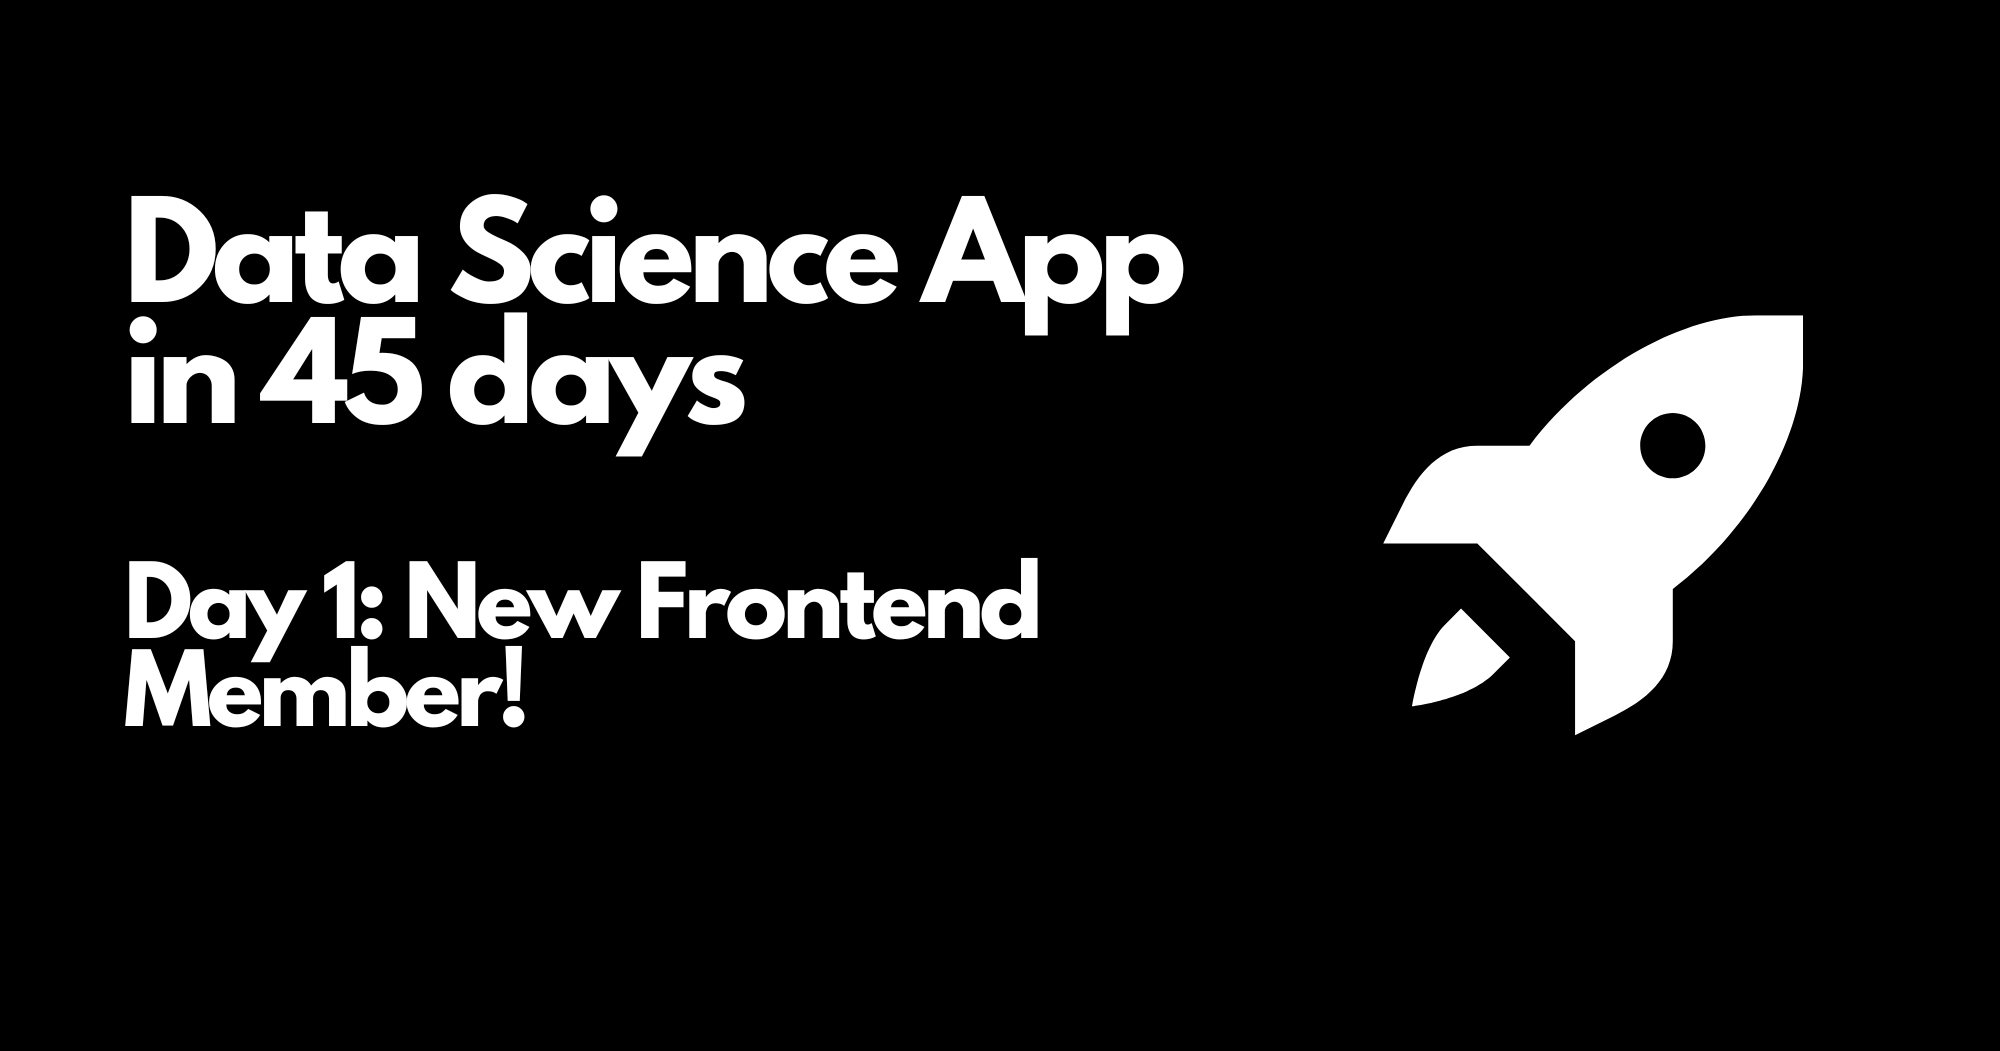 Day 1 - Data Science App in 45 days - New Frontend Member!